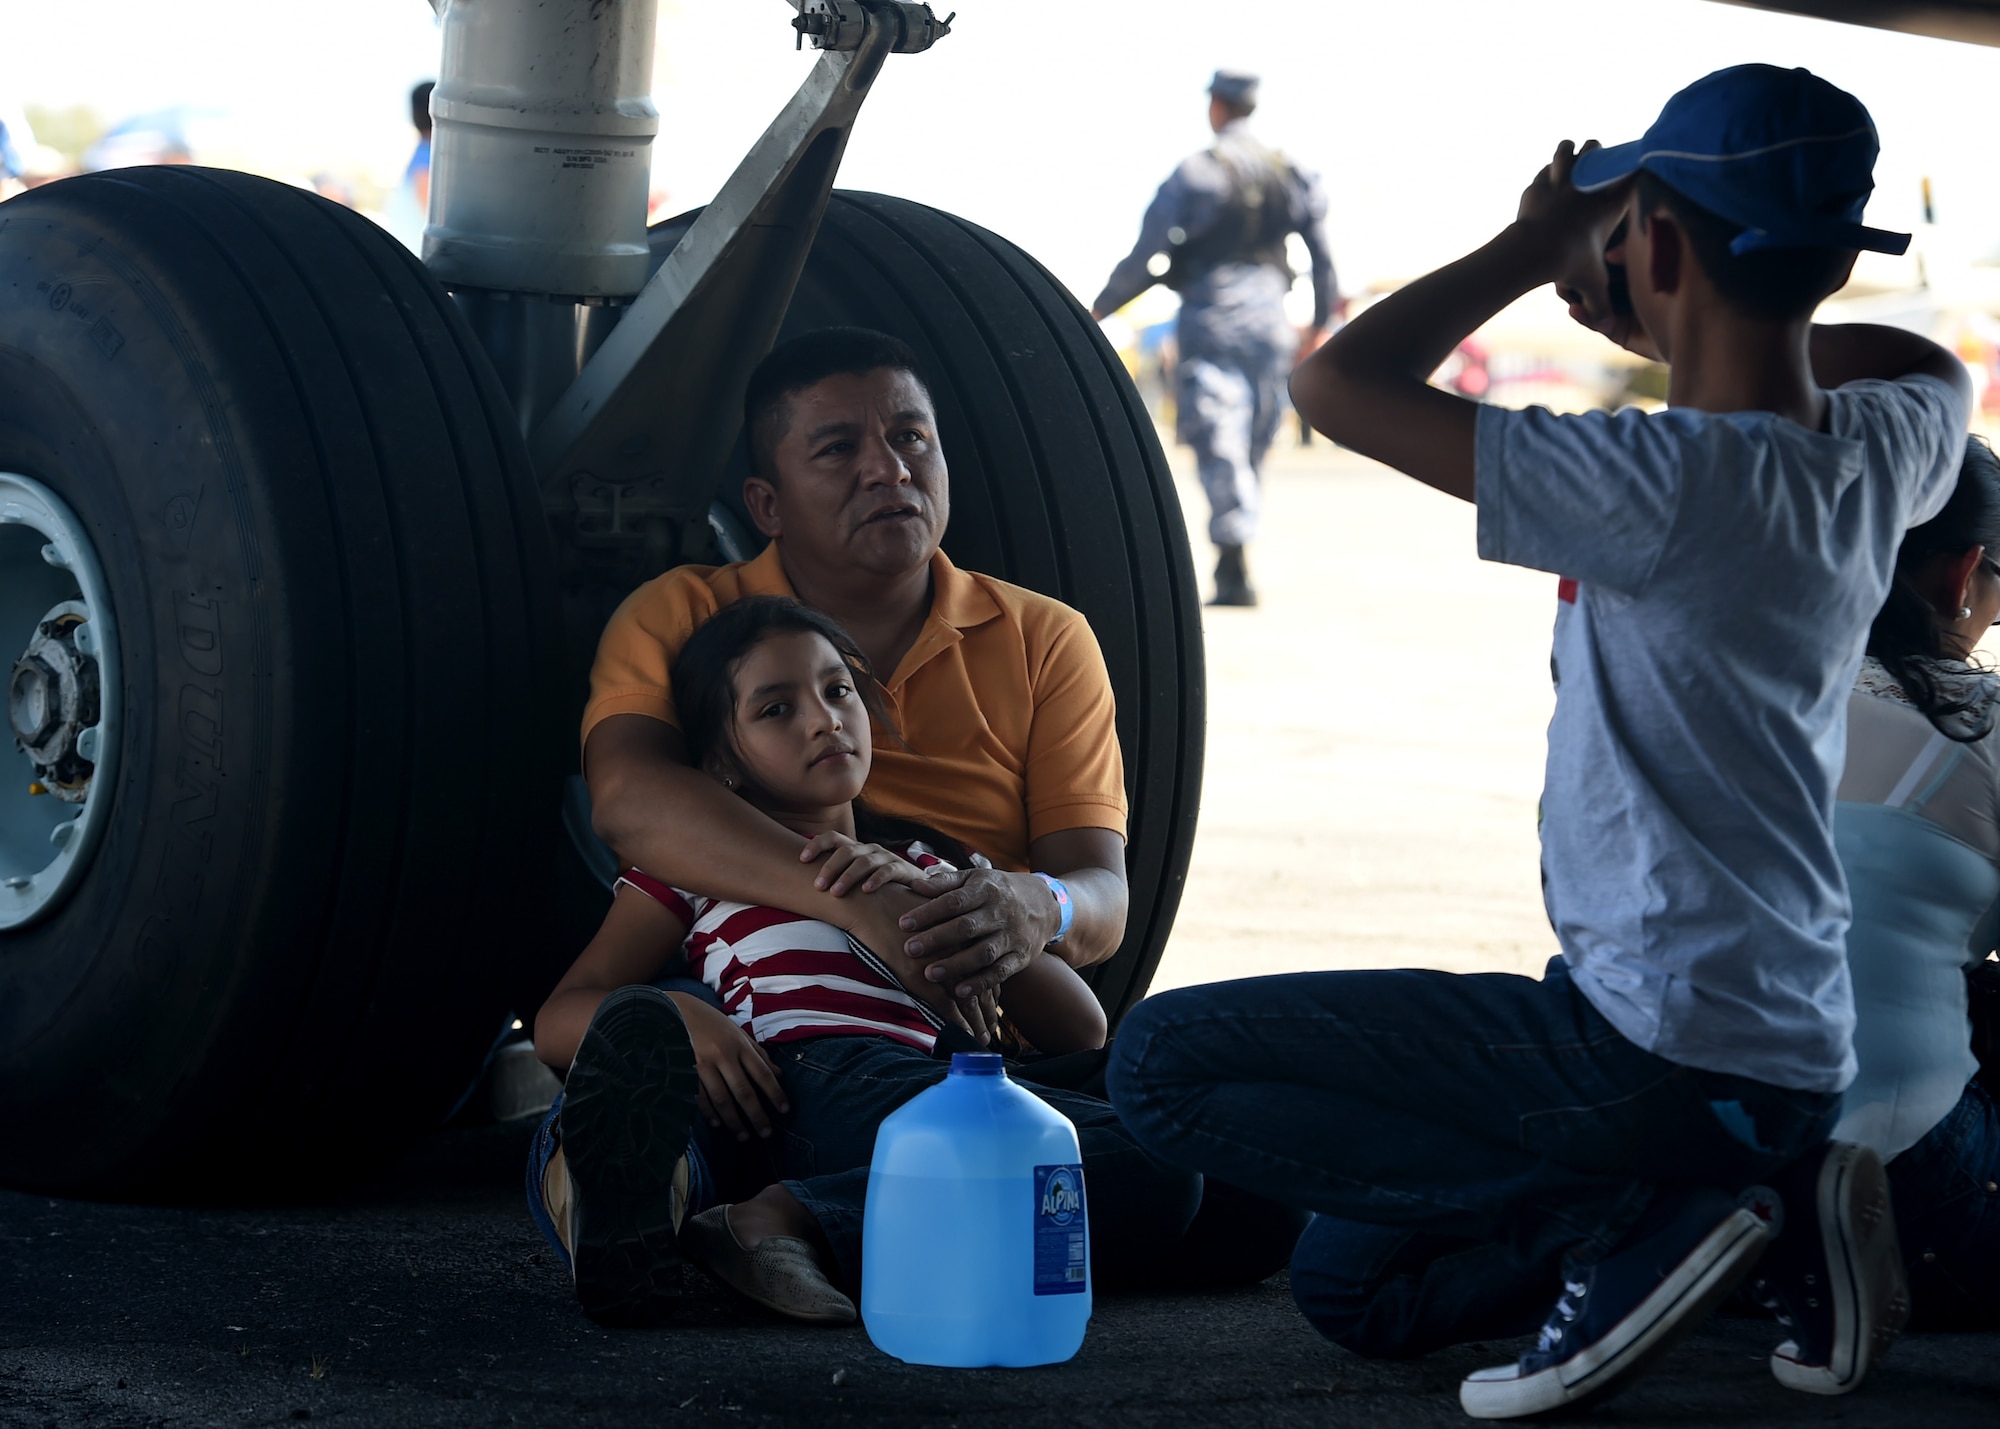 Citizens from El Salvador sit under a U.S. Air Force C-17 Globemaster III cargo aircraft, 58th Airlift Squadron, at Ilopango International Airport in San Salvador, El Savador, Jan. 30, during the 2016 Ilopango Airshow. The C-17 was sent from Altus Air Force Base, Okla., to foster relationships between the U.S. and El Salvador. The aircraft was setup as a static display for the attendees to view and learn about some of its capabilities. (U.S. Air Force photo by Senior Airman Franklin R. Ramos/Released)